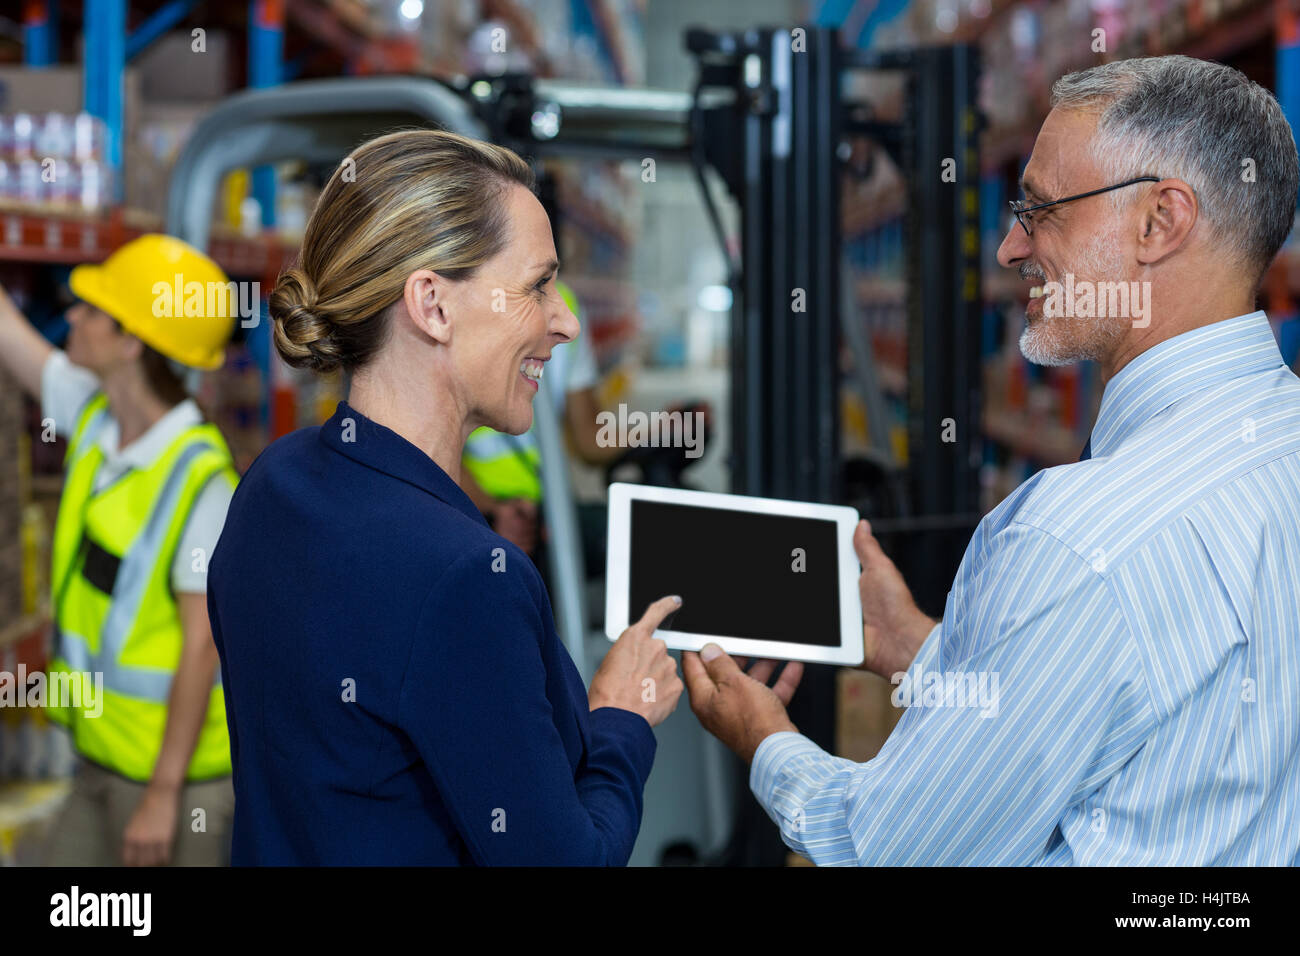 Warehouse manager and client discussing over digital tablet Stock Photo